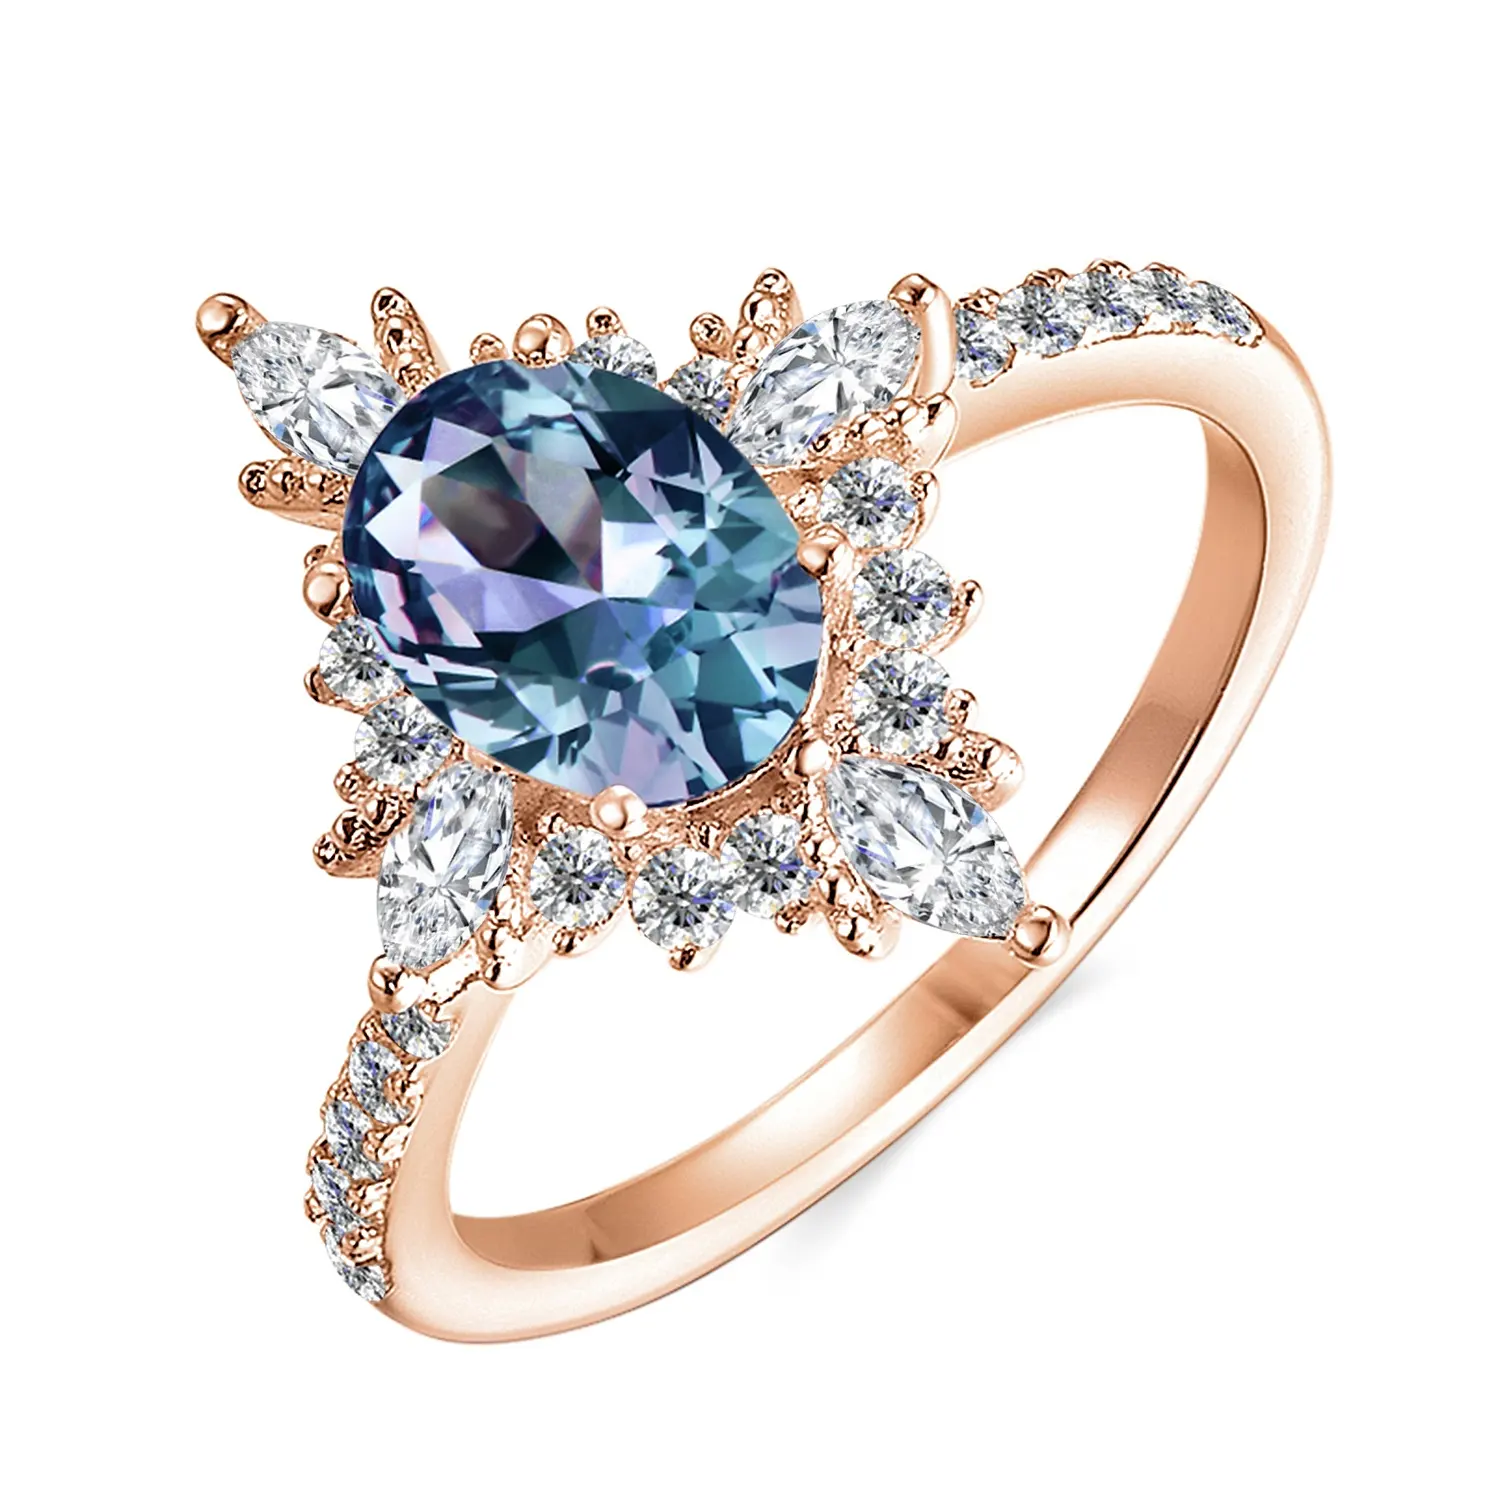 2021 Sterling Silver 18k Gold Plated New Color Change Alexandrite Gemstone Retro Cocktail Ring Destiny Jewellery